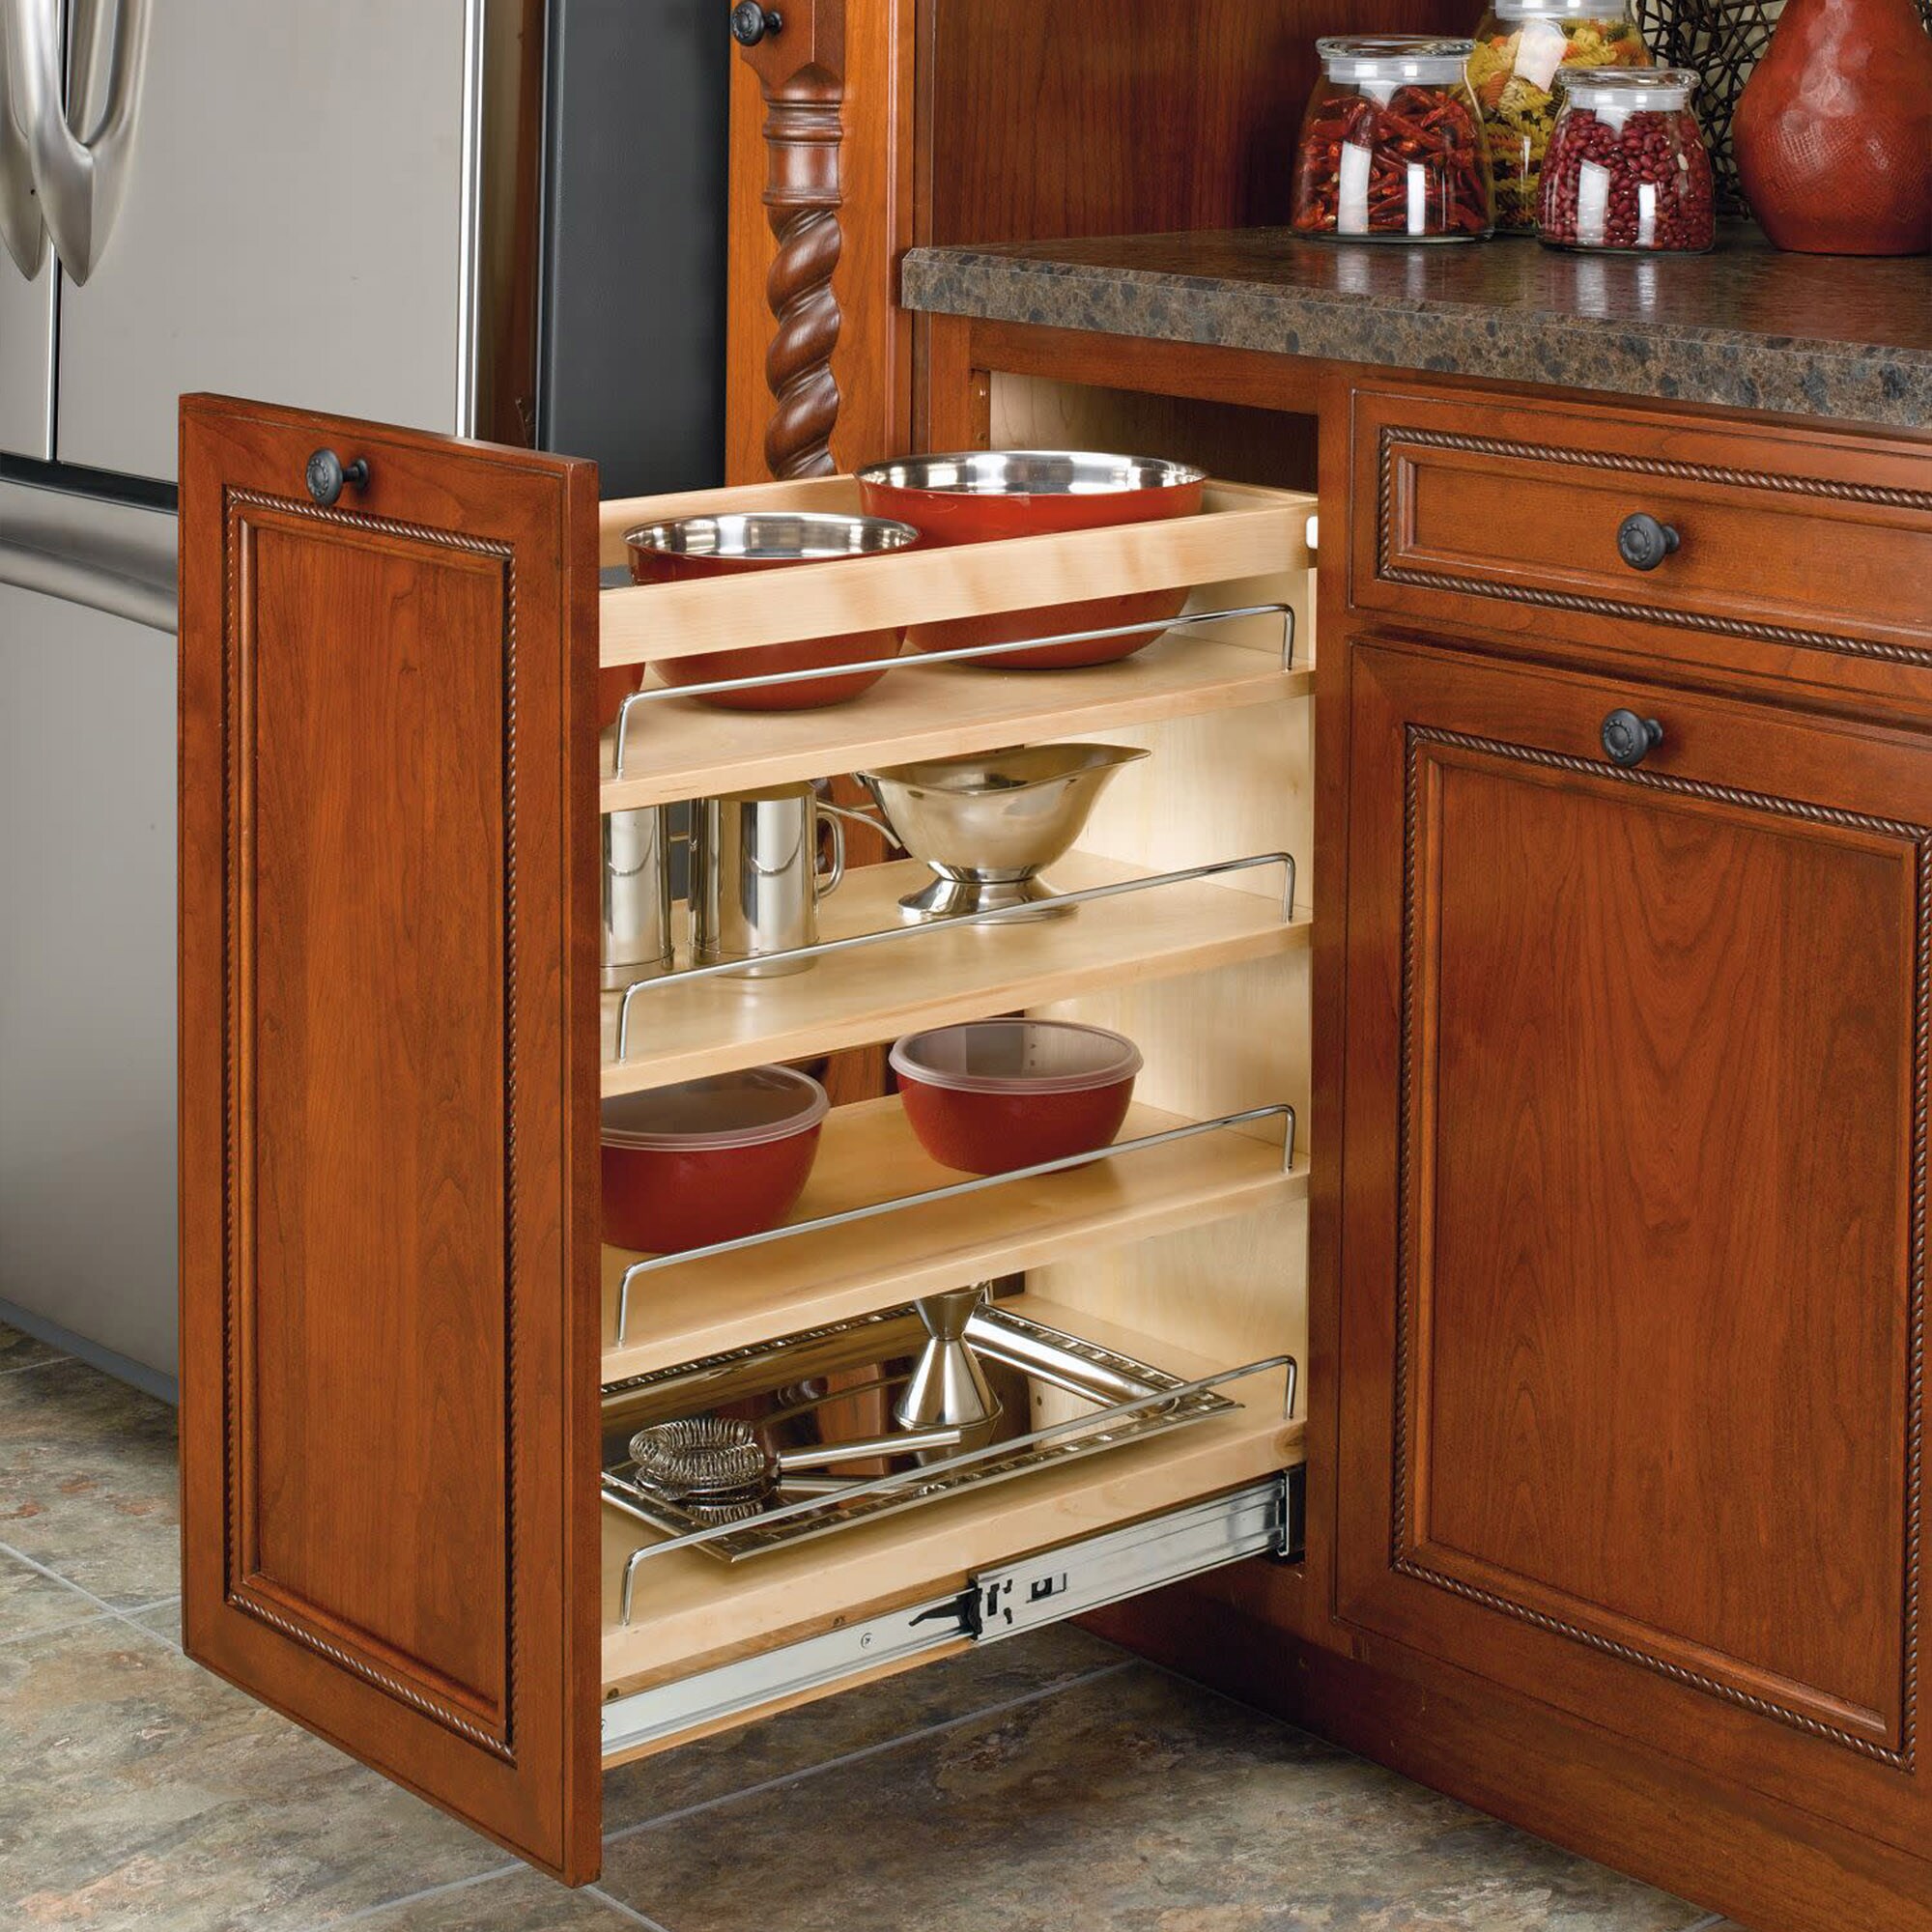 Base cabinet tray divider pullout BPOTD